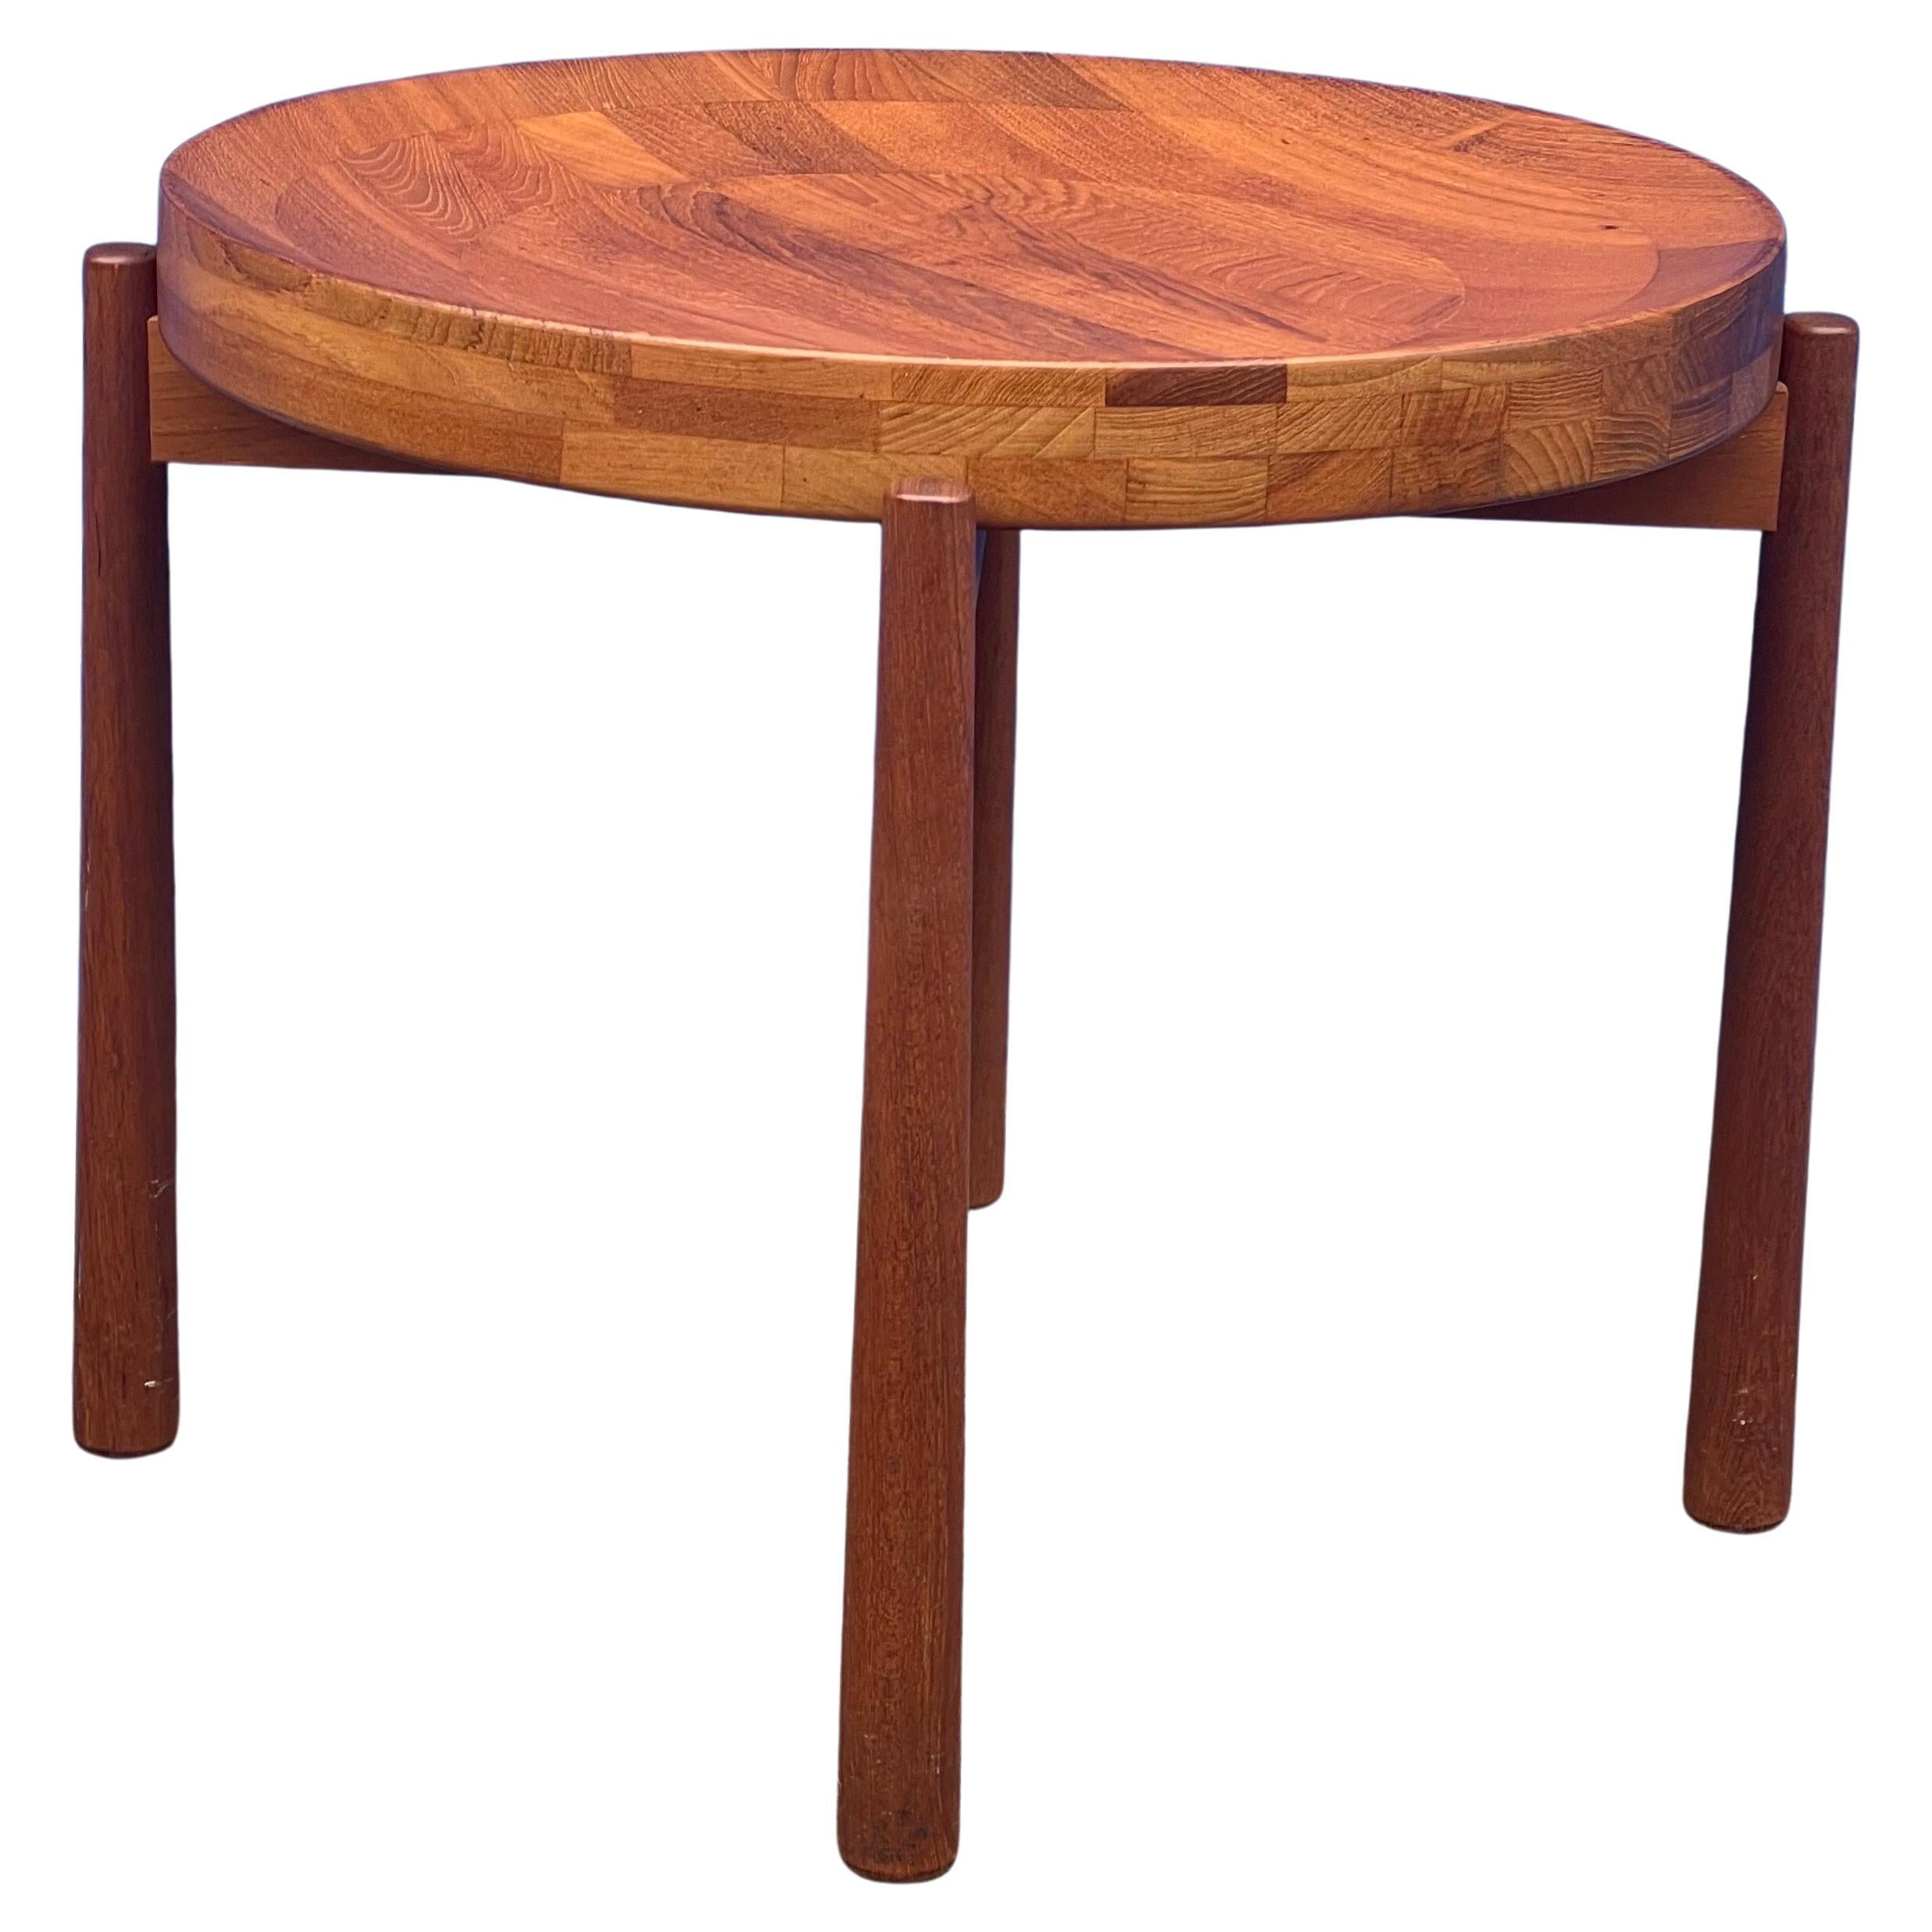 Swedish Pair of Teak Tray Side Tables Attributed to Jens Quistgaard for DUX of Sweden For Sale